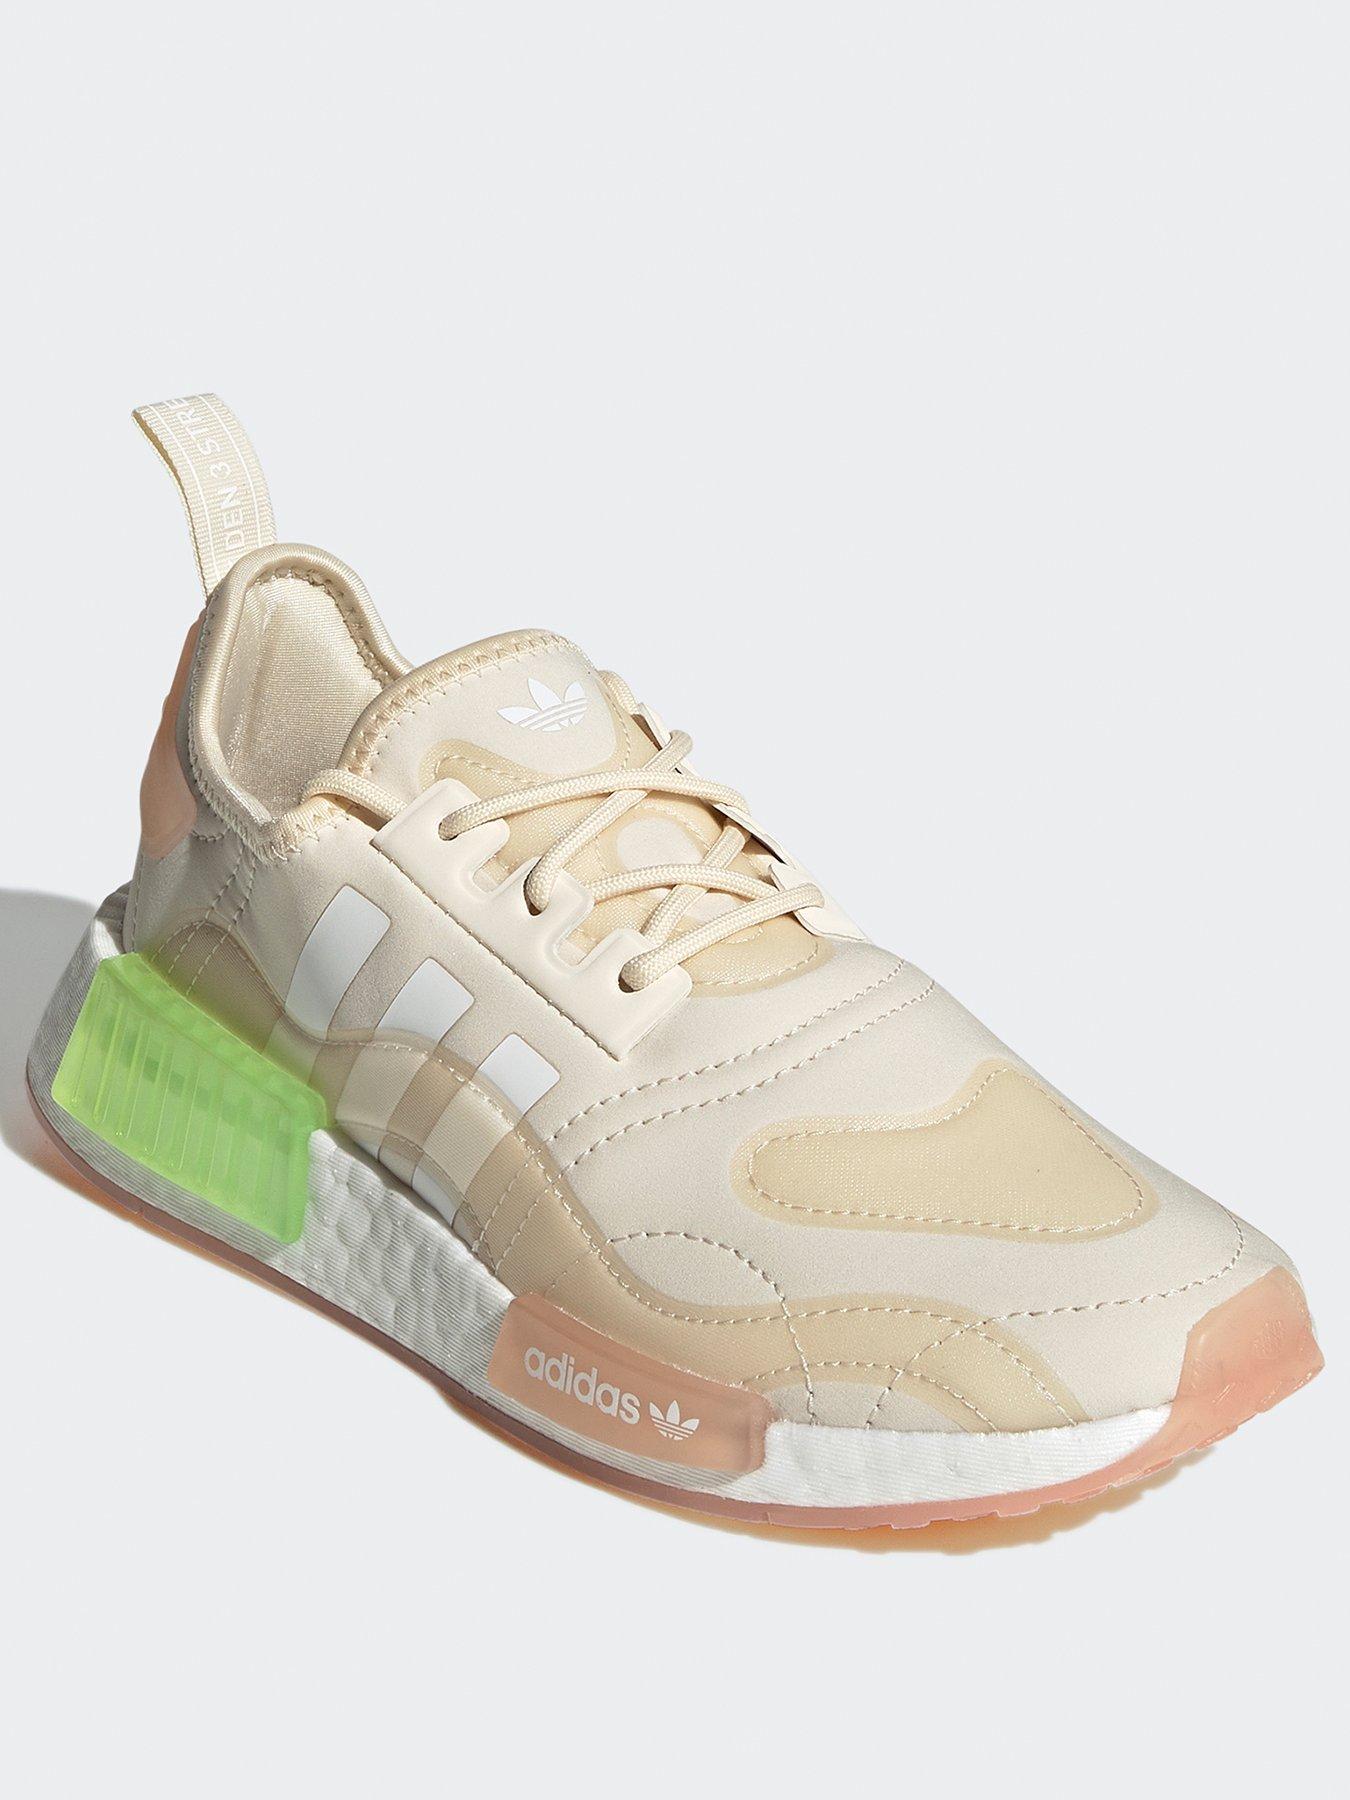 Women Nmd_r1 Shoes